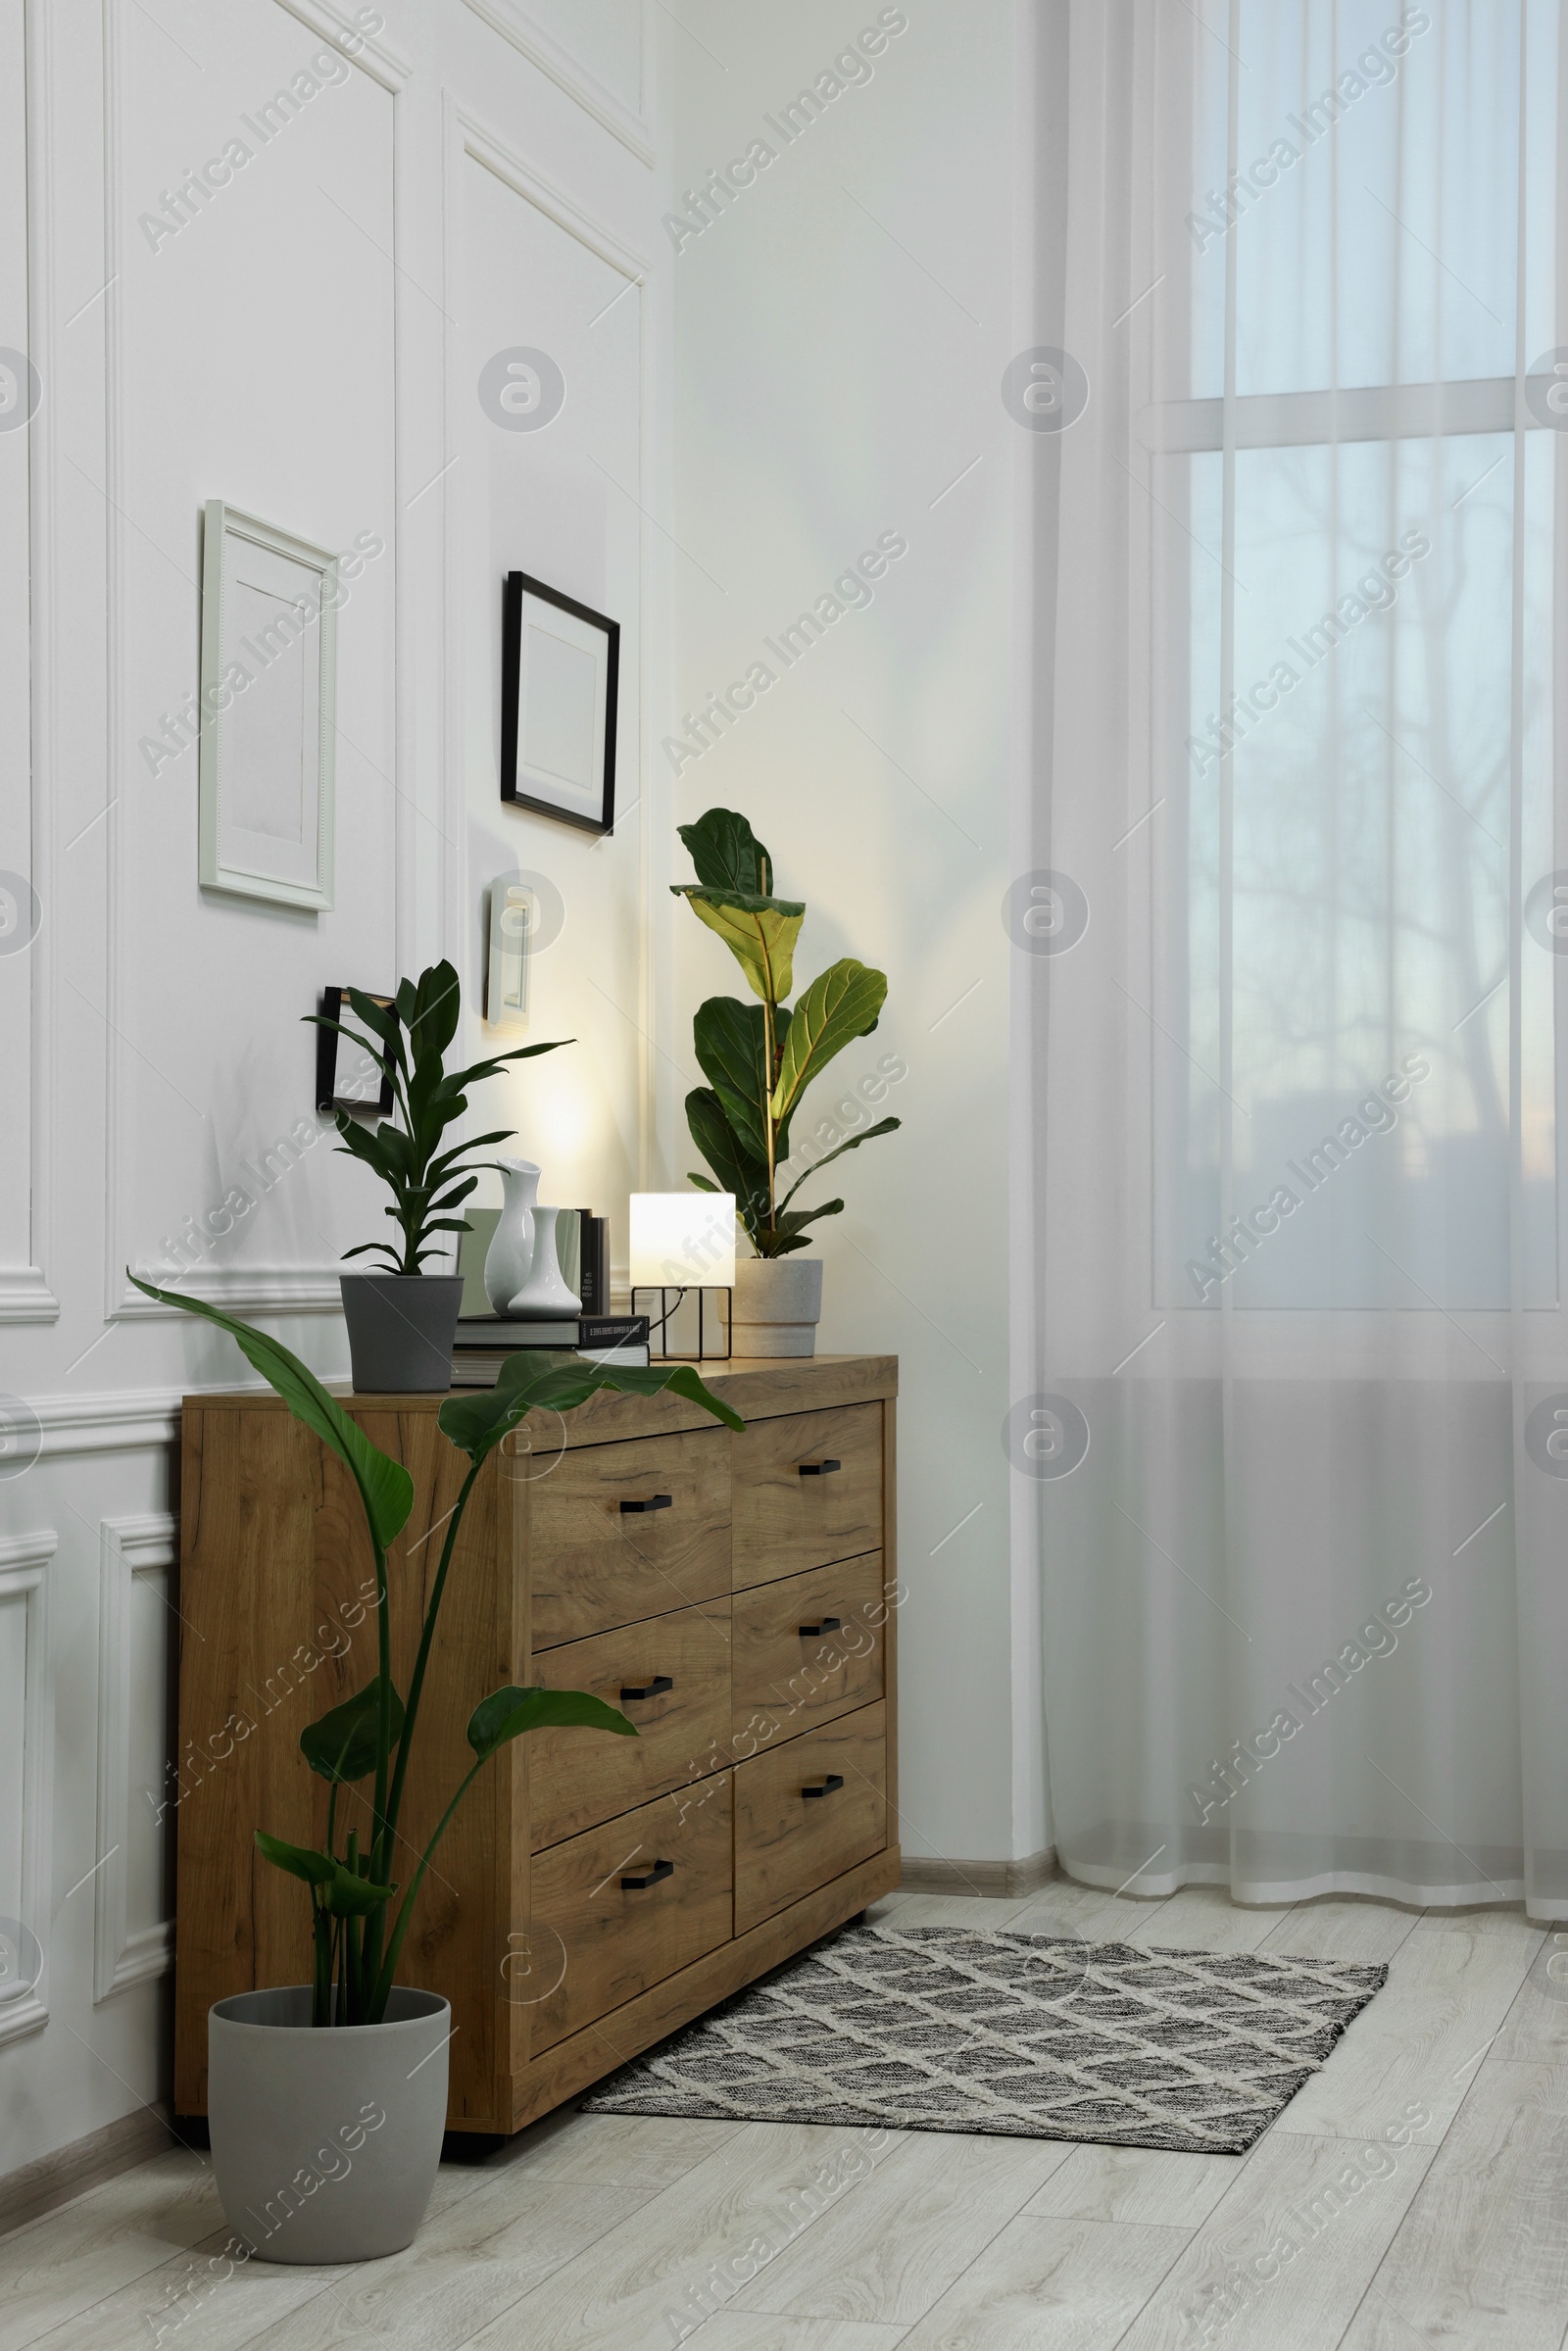 Photo of Stylish room interior with chest of drawers, decor elements and houseplants